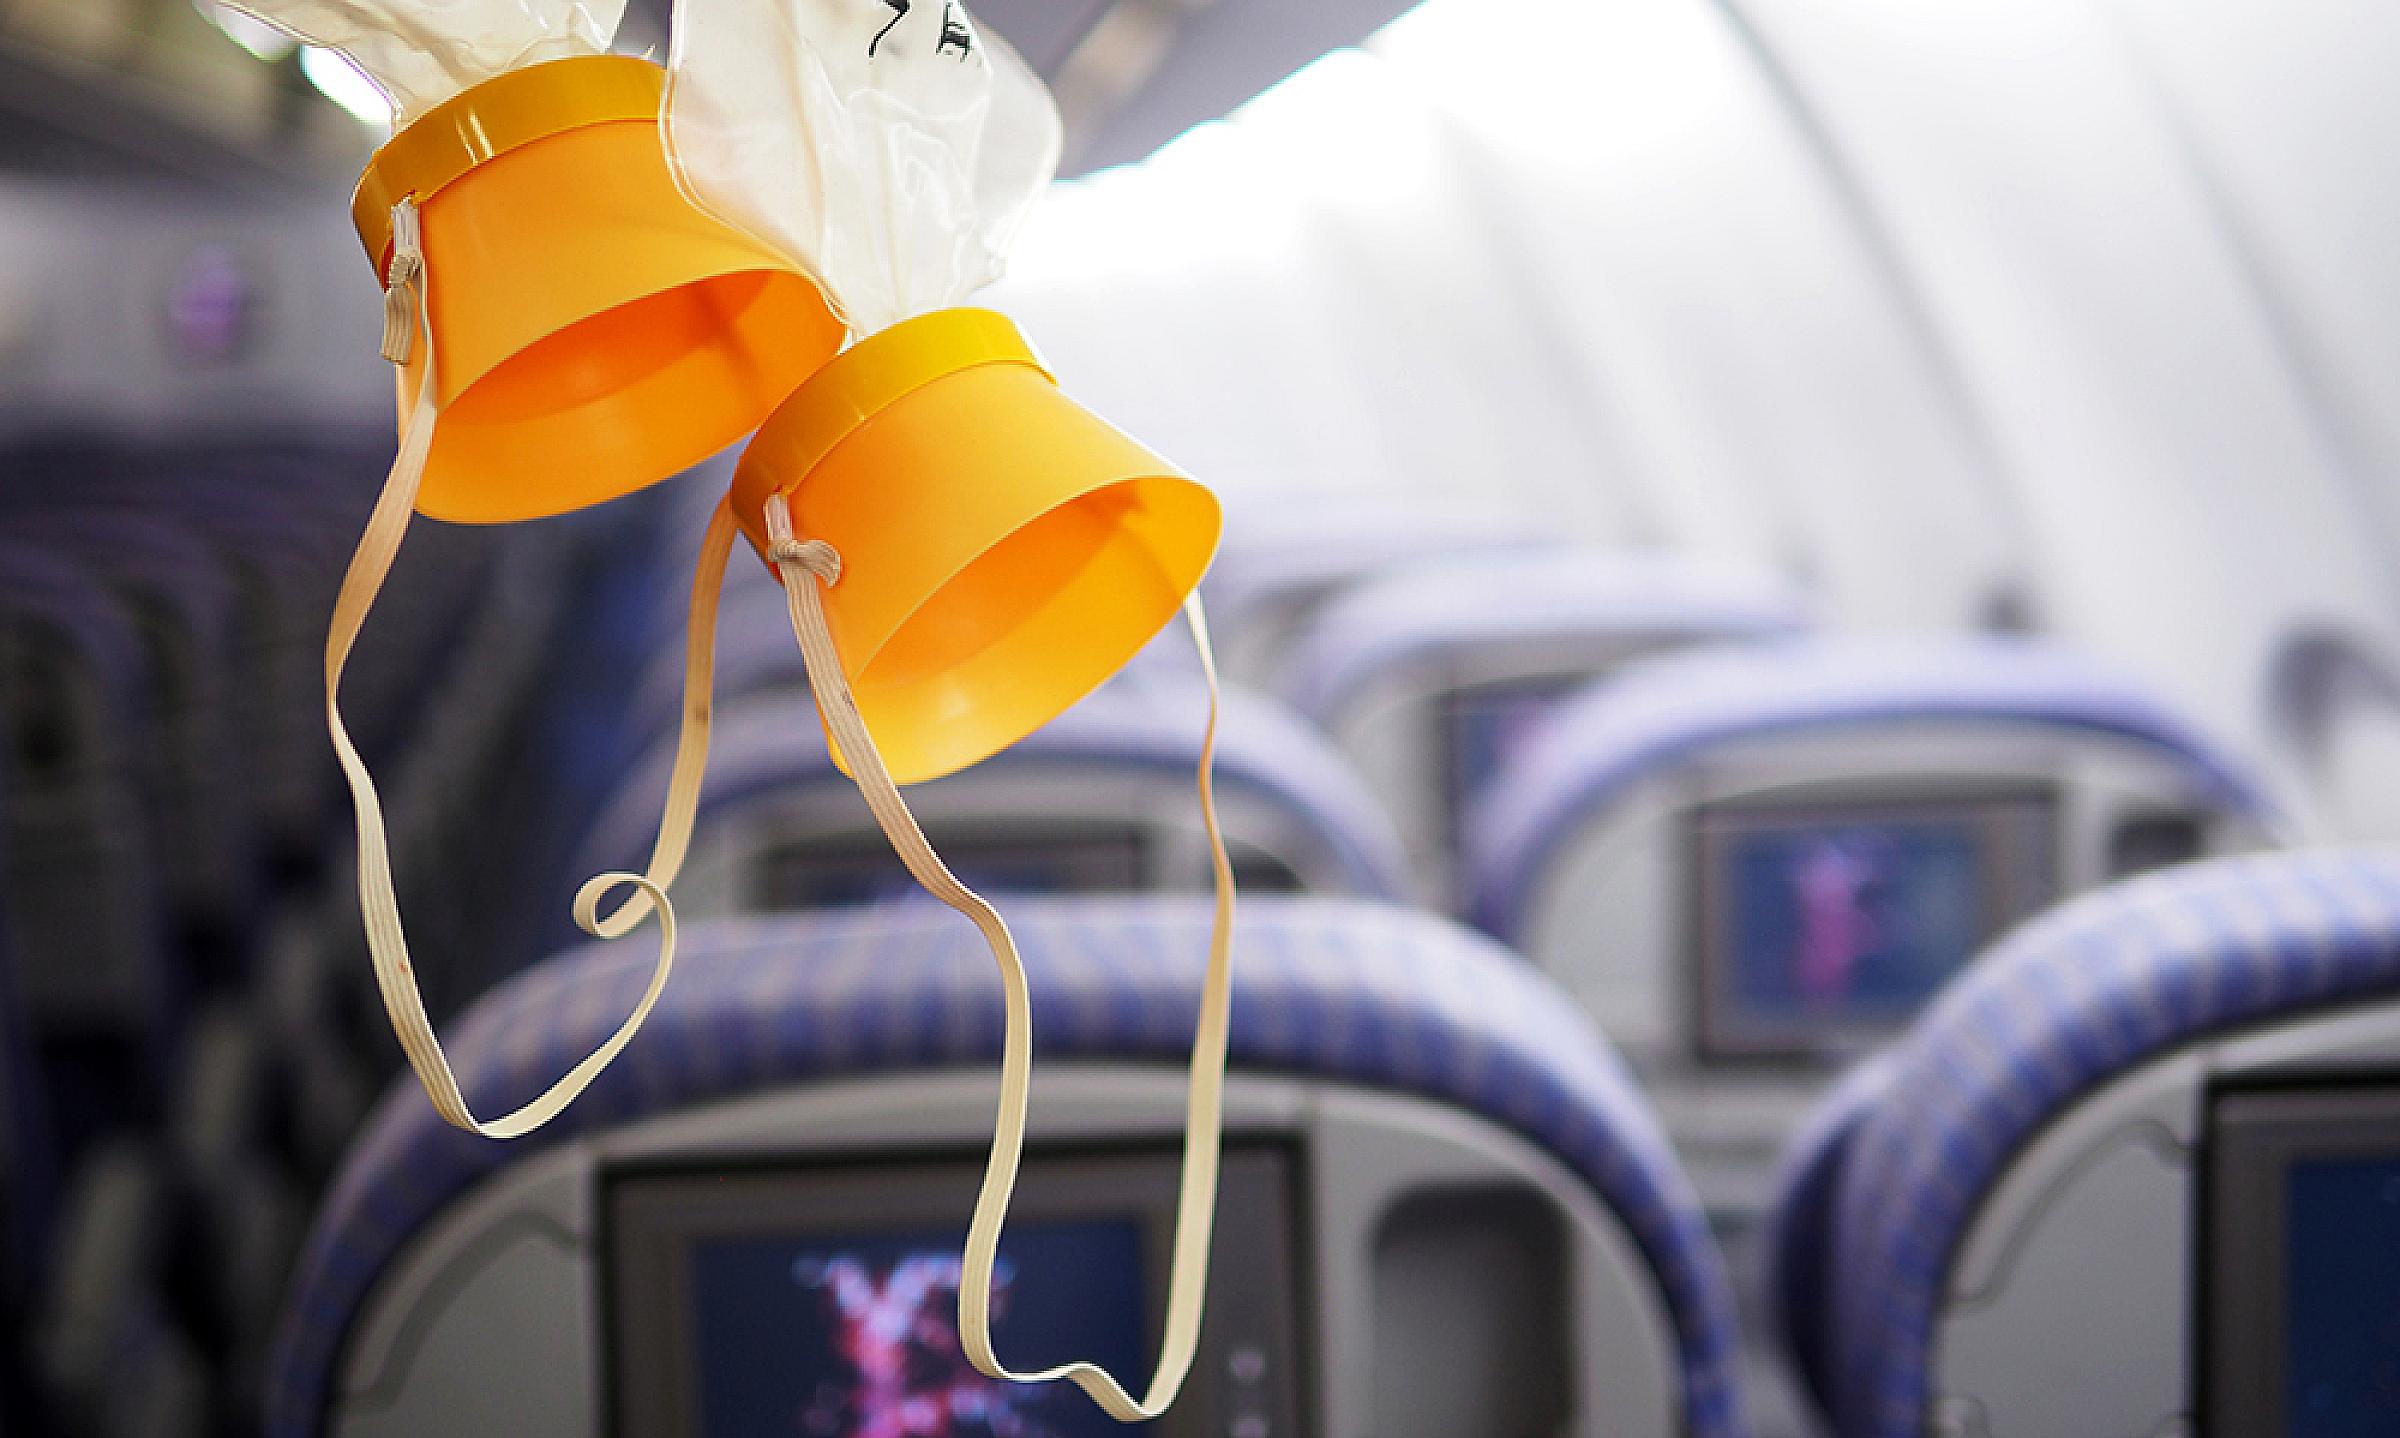 Oxygen masks hanging from ceiling of plane